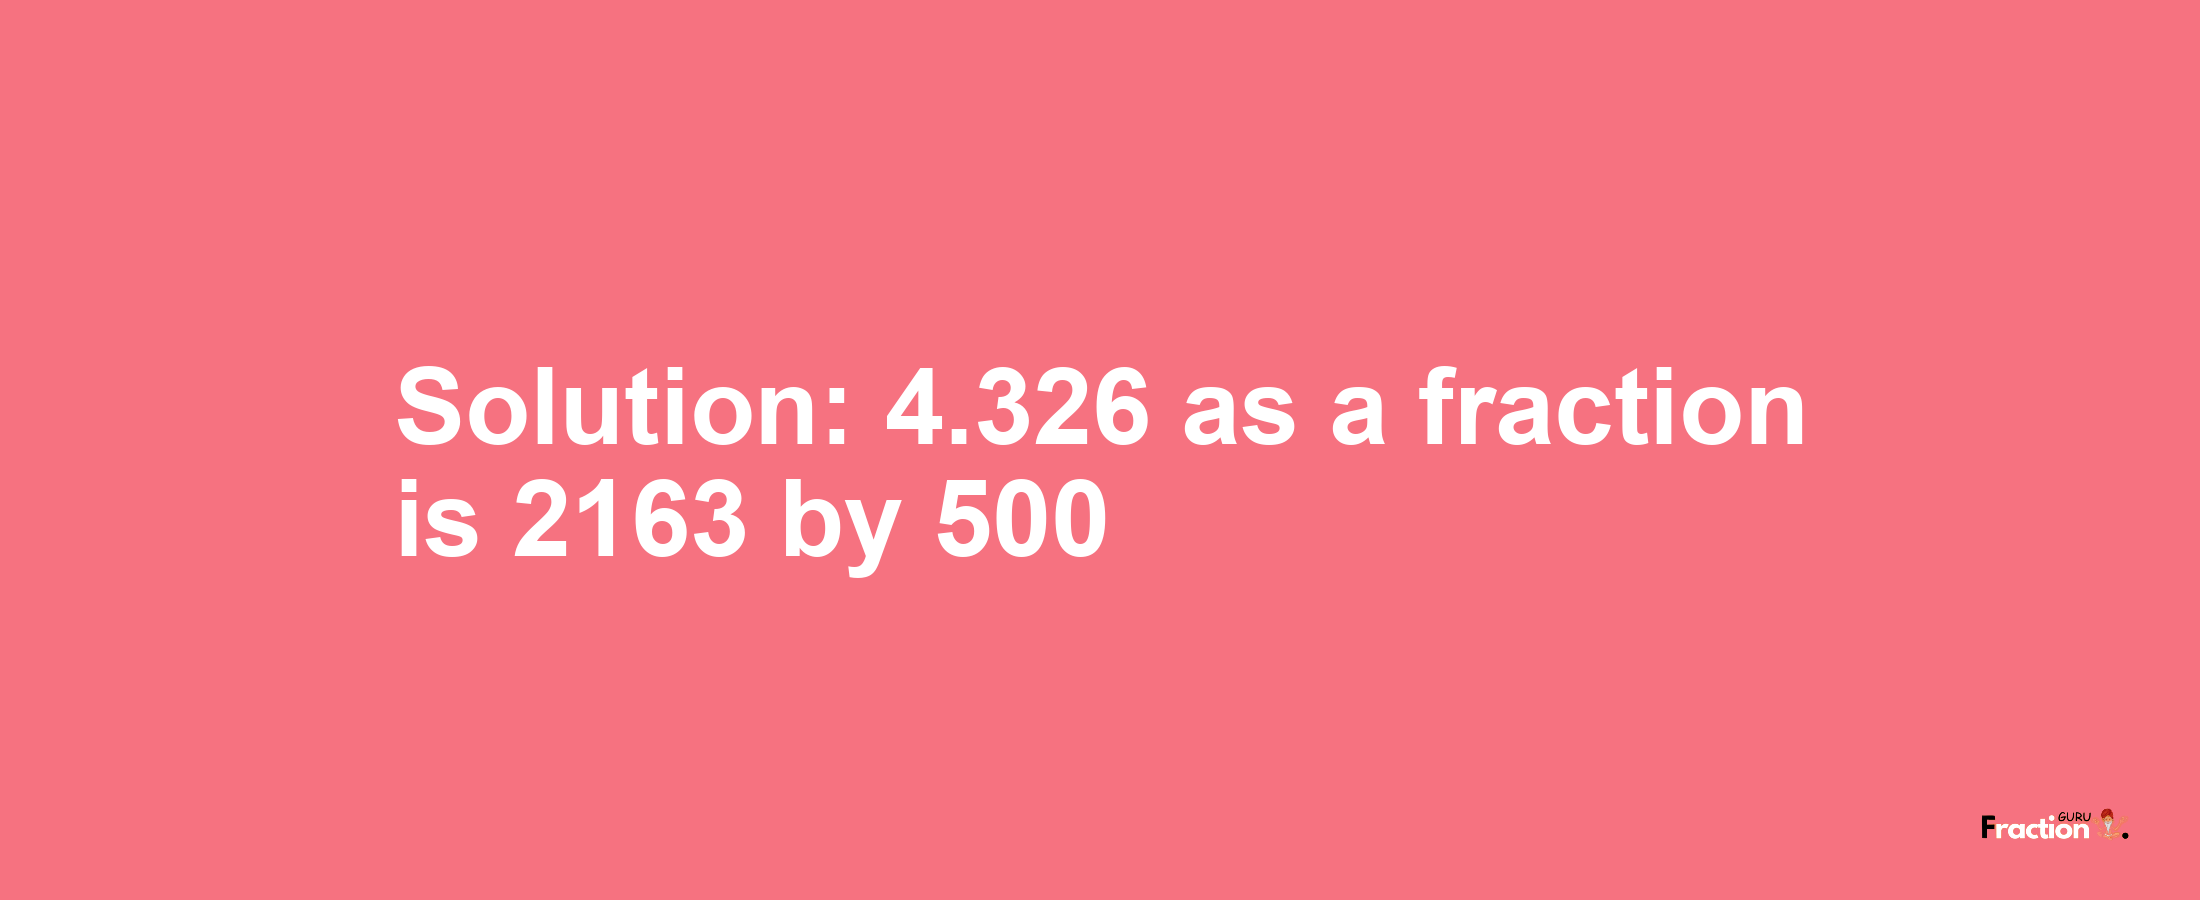 Solution:4.326 as a fraction is 2163/500